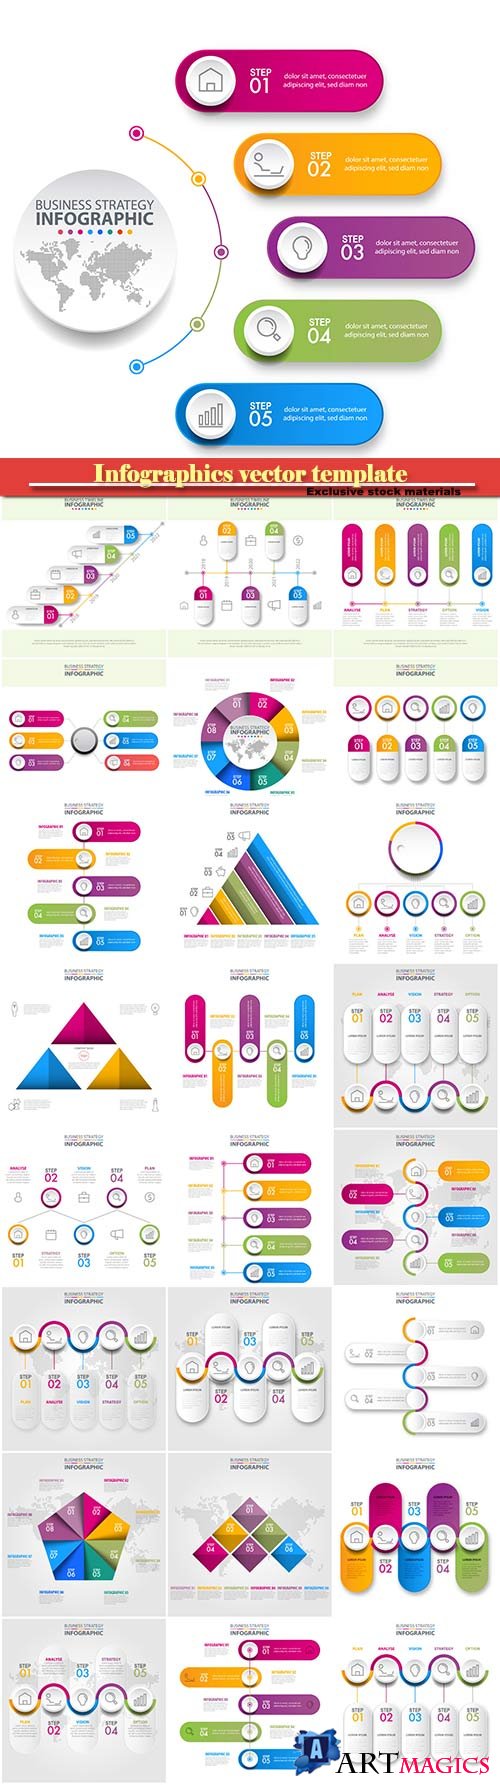 Infographics vector template for business presentations or information banner # 11